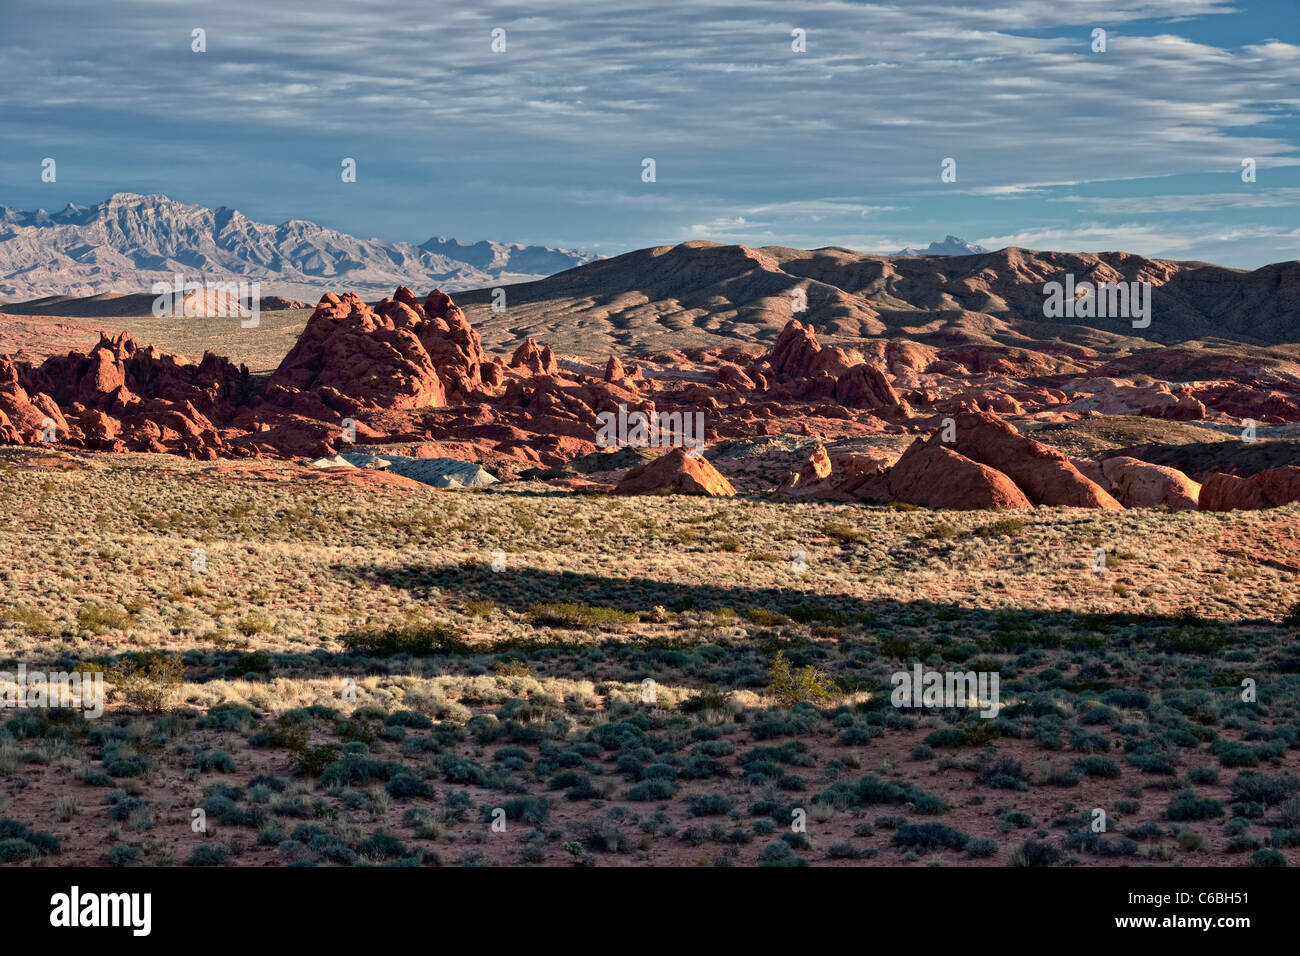 Morning light streams across the sagebrush and sandstone landscape of Nevada's Valley of Fire State Park. Stock Photo